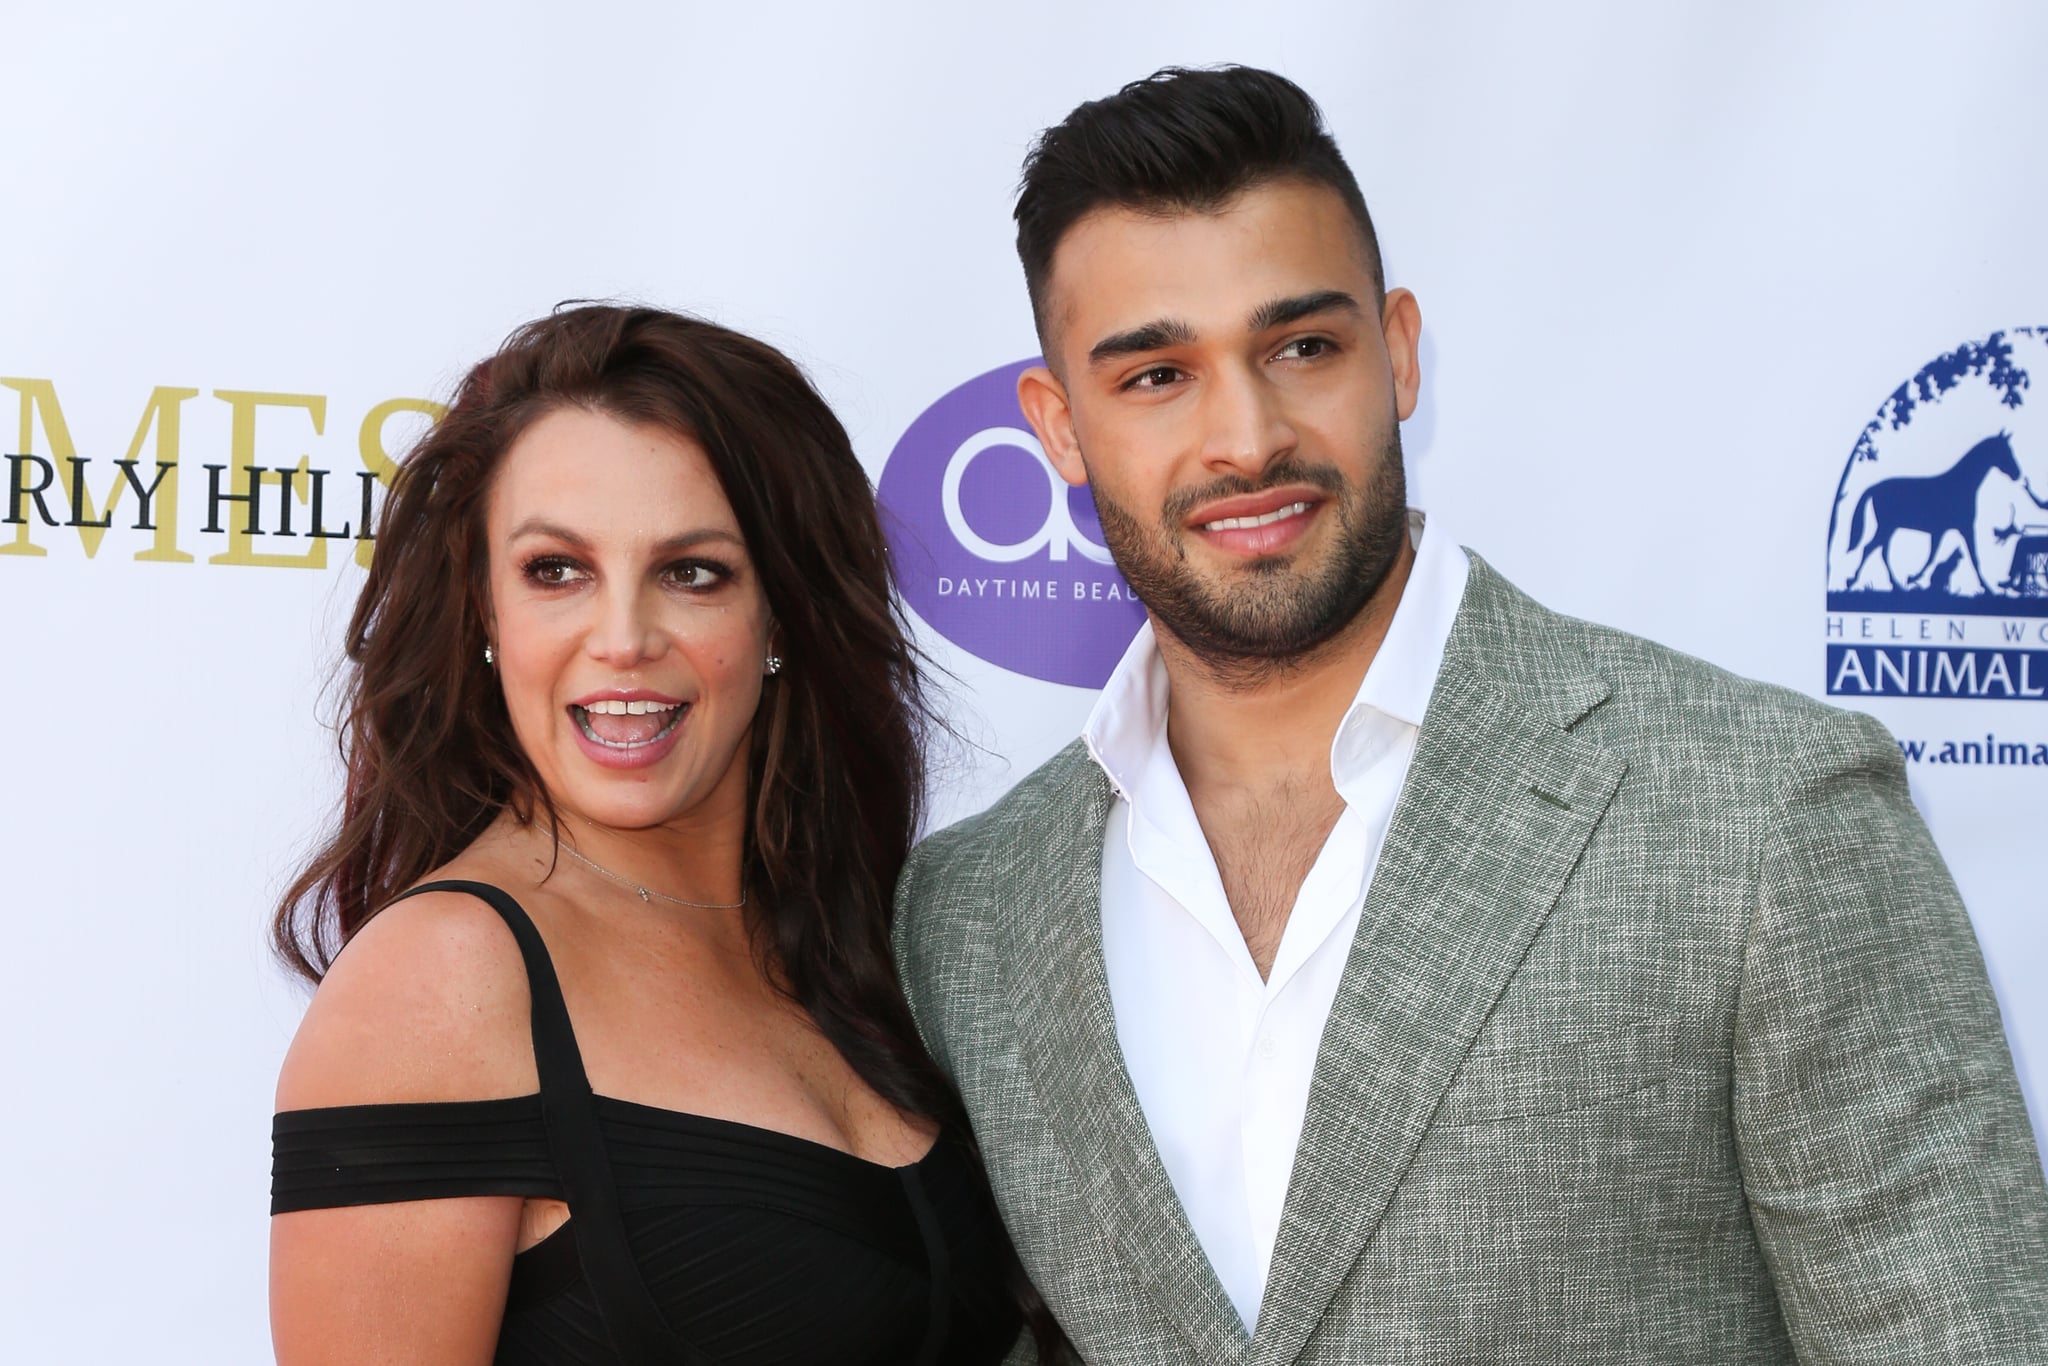 LOS ANGELES, CALIFORNIA - SEPTEMBER 20: Britney Spears (L) and Sam Asghari (R) attend the 2019 Daytime Beauty Awards at The Taglyan Complex on September 20, 2019 in Los Angeles, California.  (Photo by Paul Archuleta/FilmMagic)